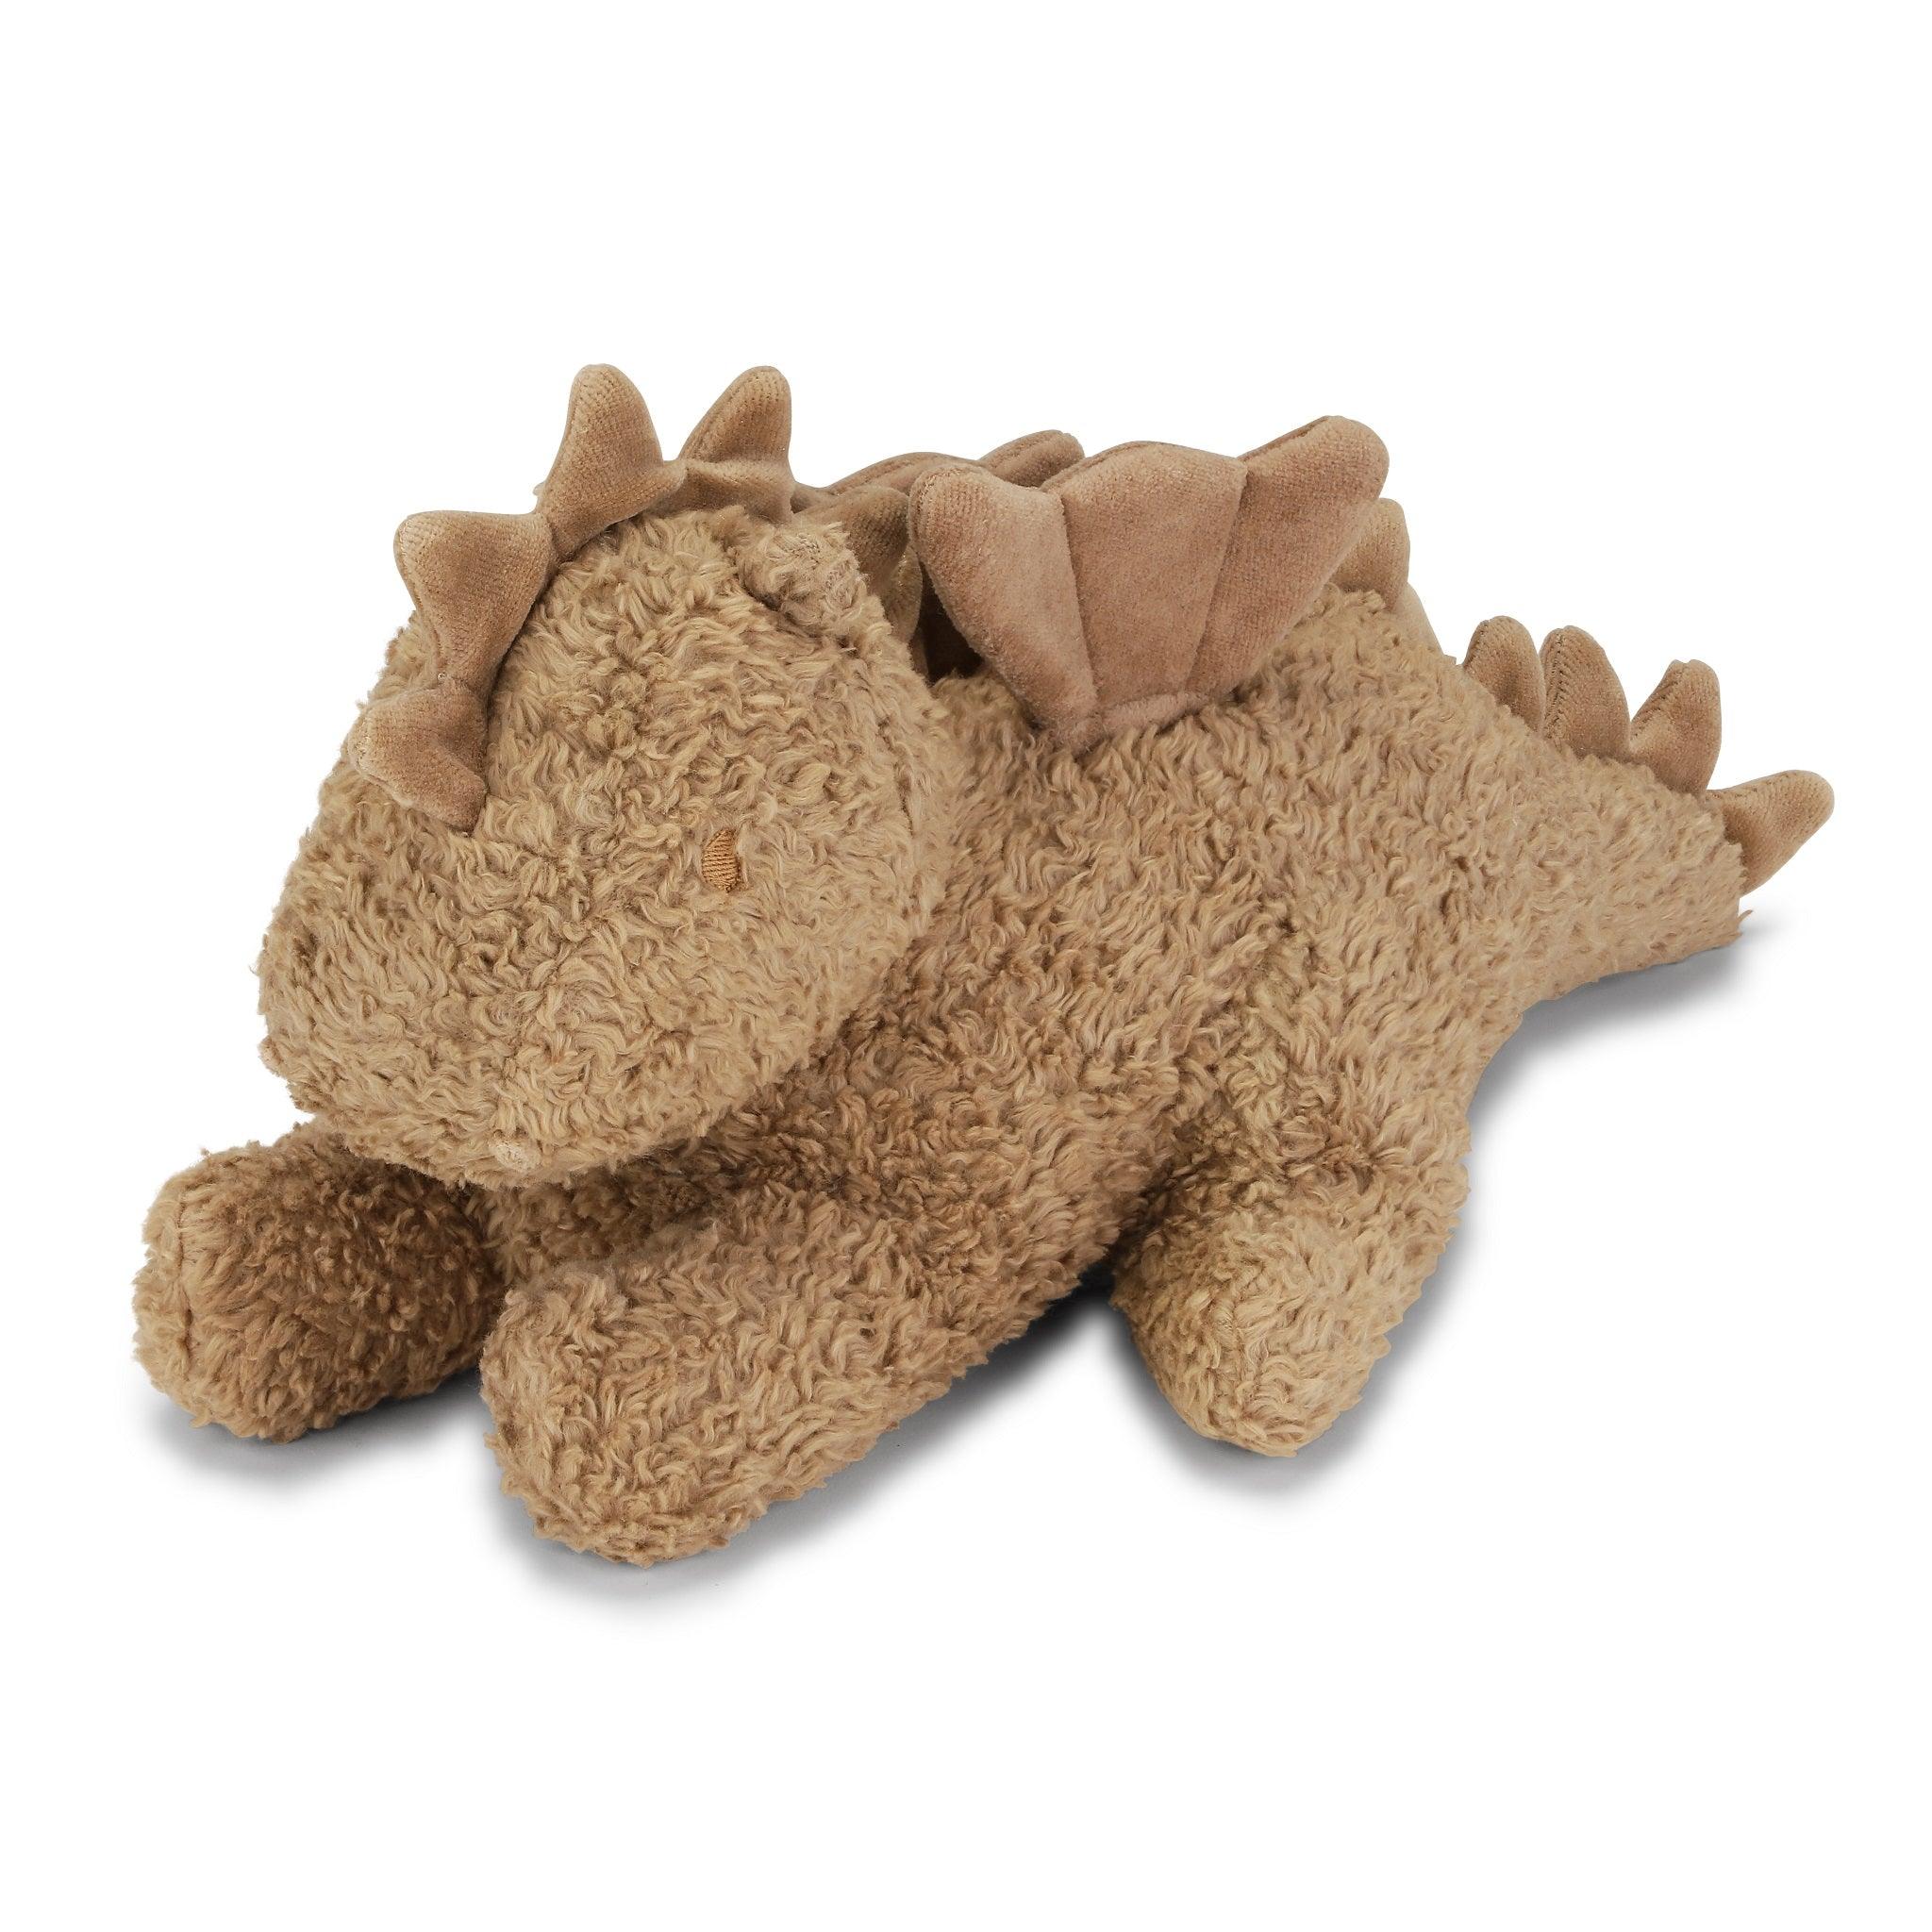 Large Stuffed Teddy Dragon - Why and Whale